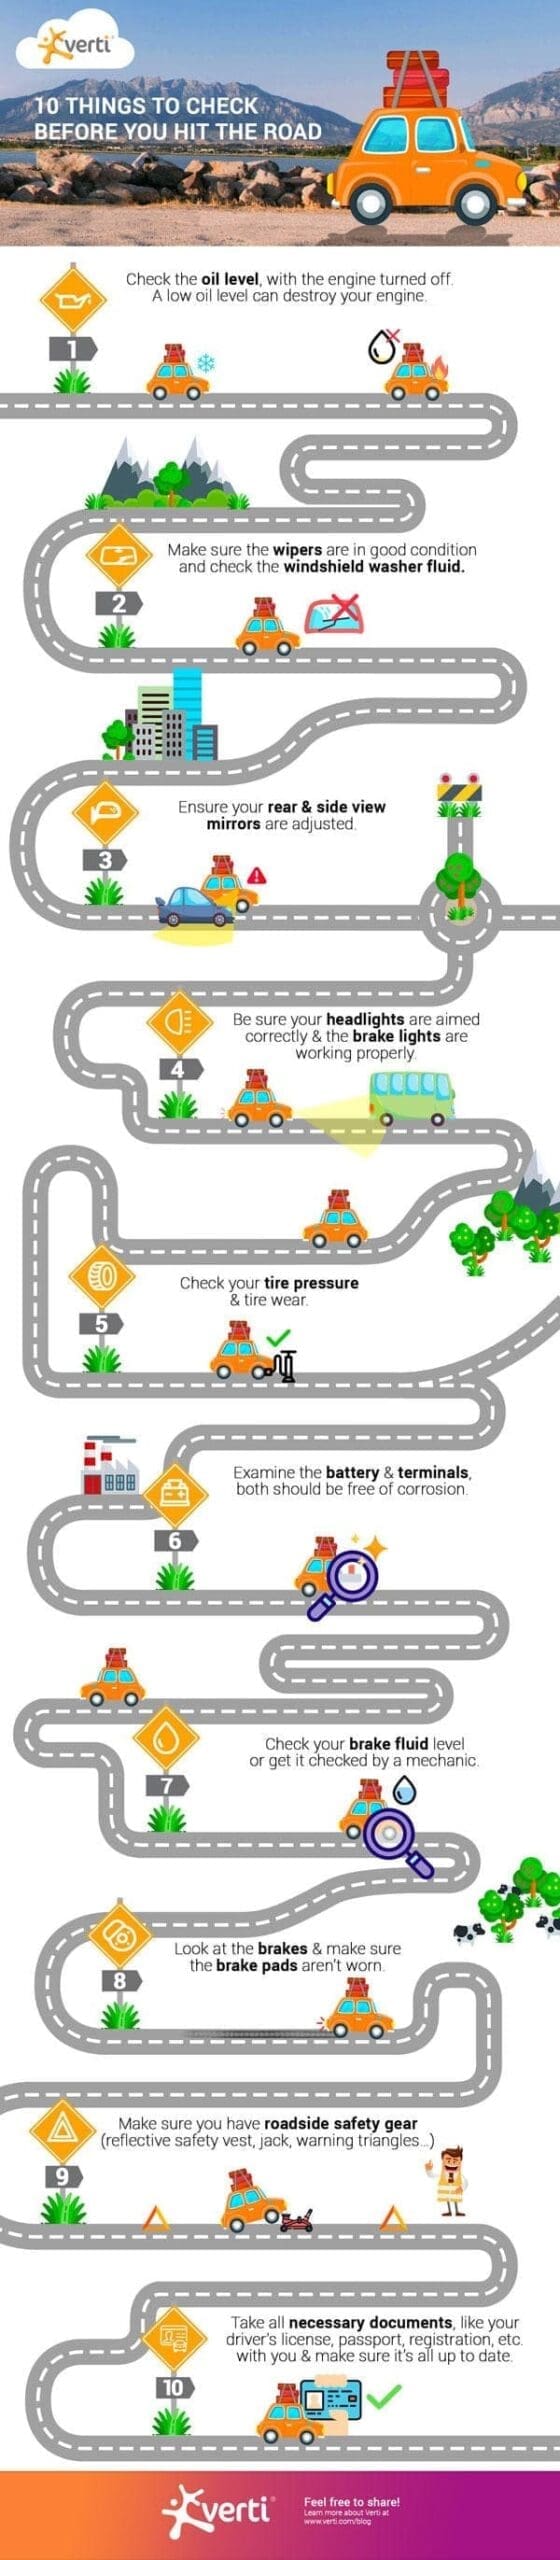 road trip travelling tips